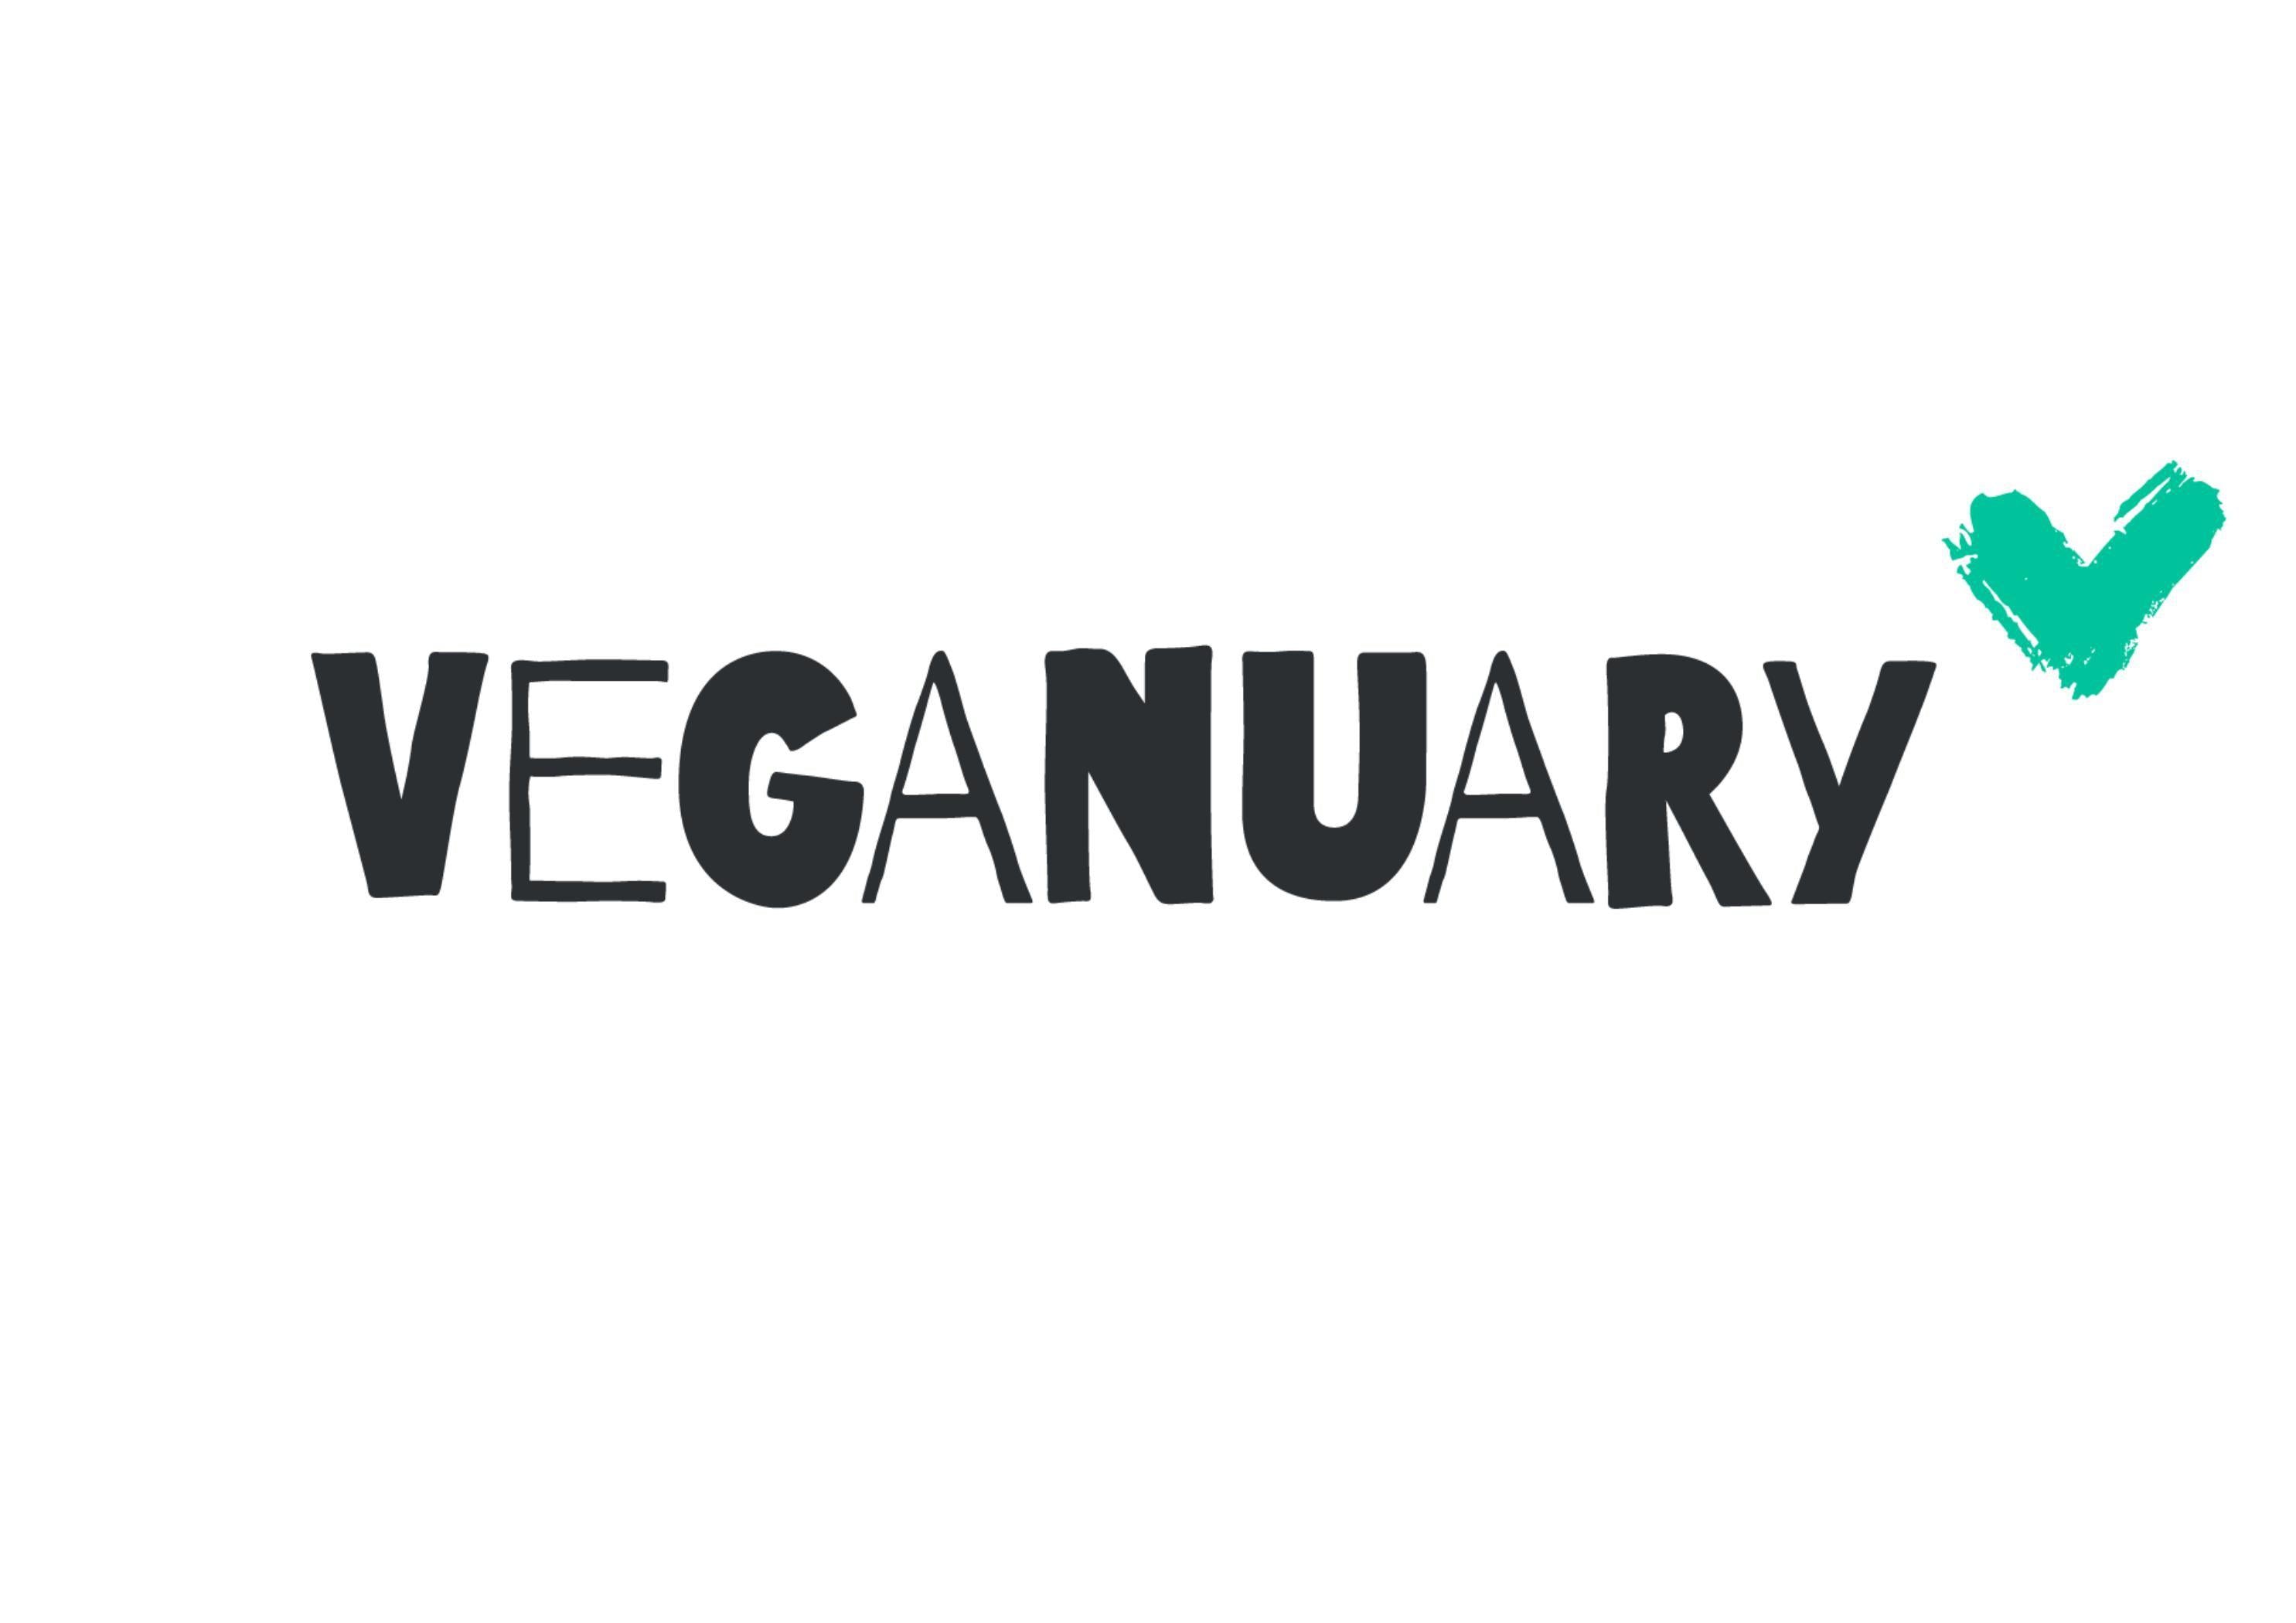 A4 edible cake topper with the Veganuary Green logo